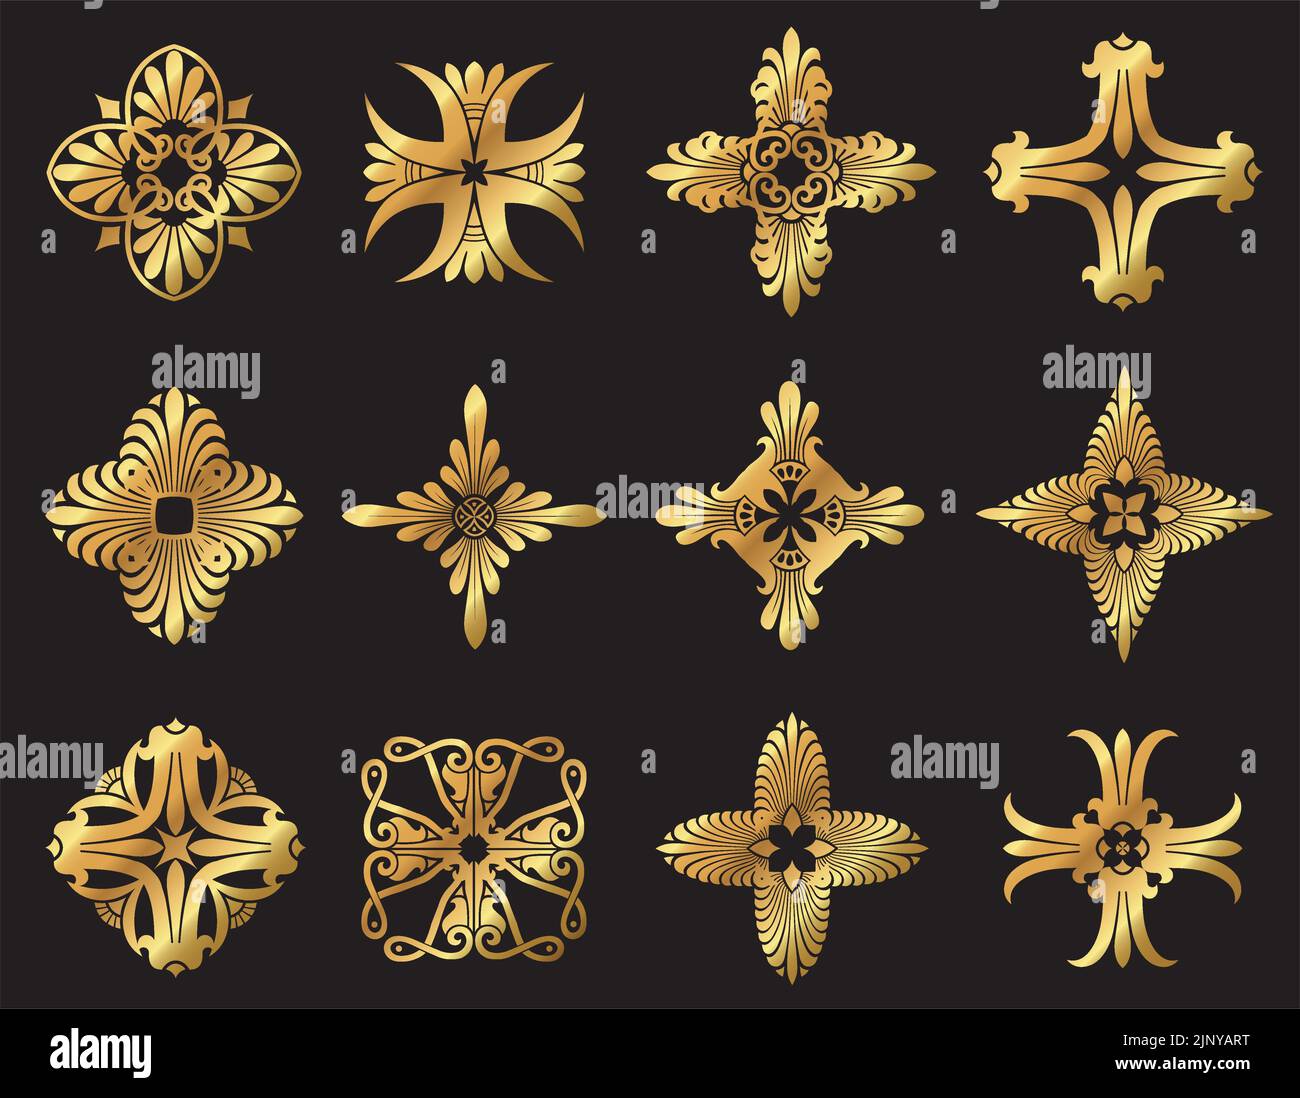 A set of vintage vector gold floral Greek style decorative icons. Stock Vector